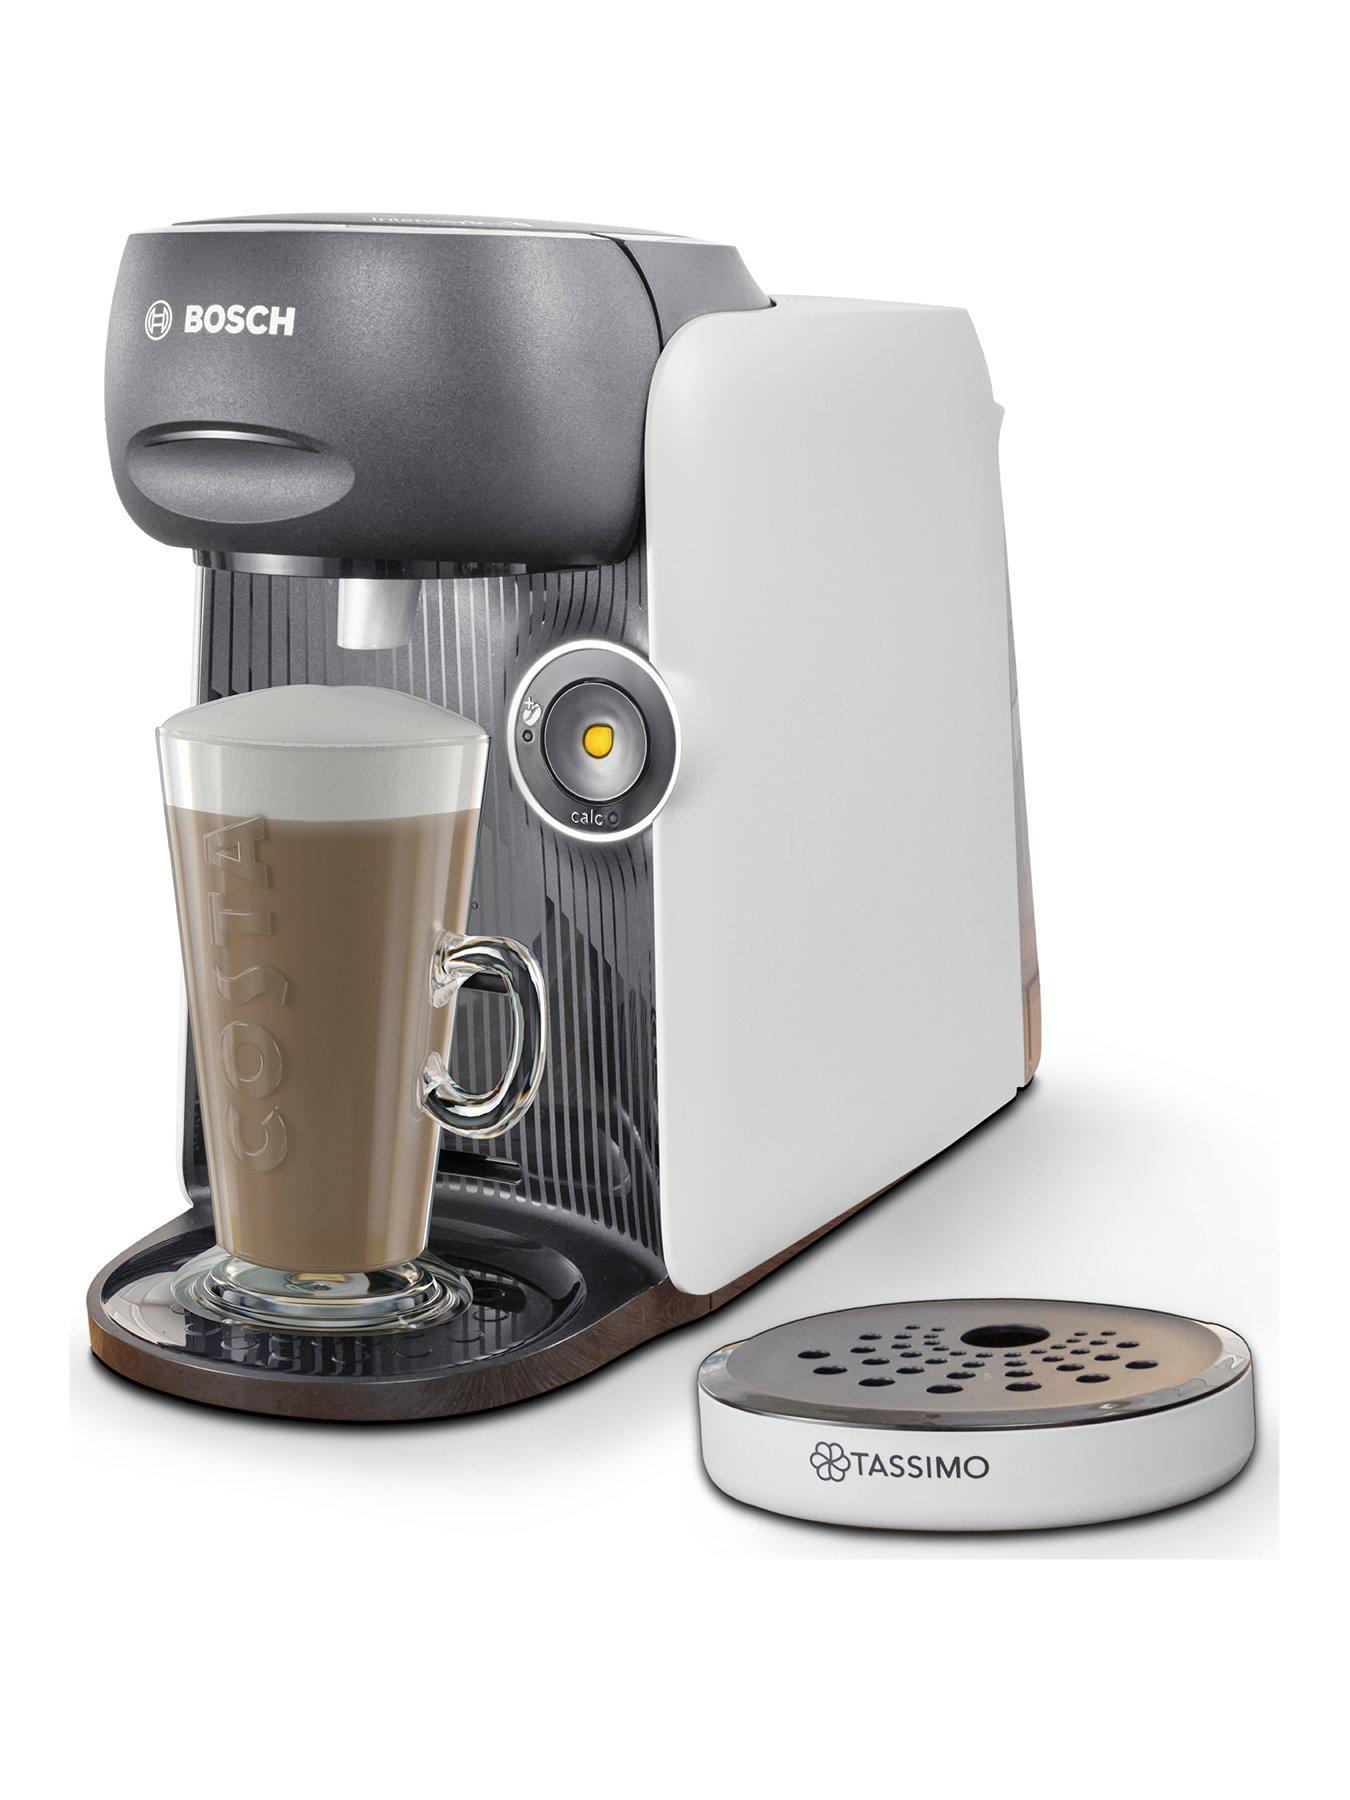 How To Use A Bosch Tassimo Coffee Maker-Full Tutorial 